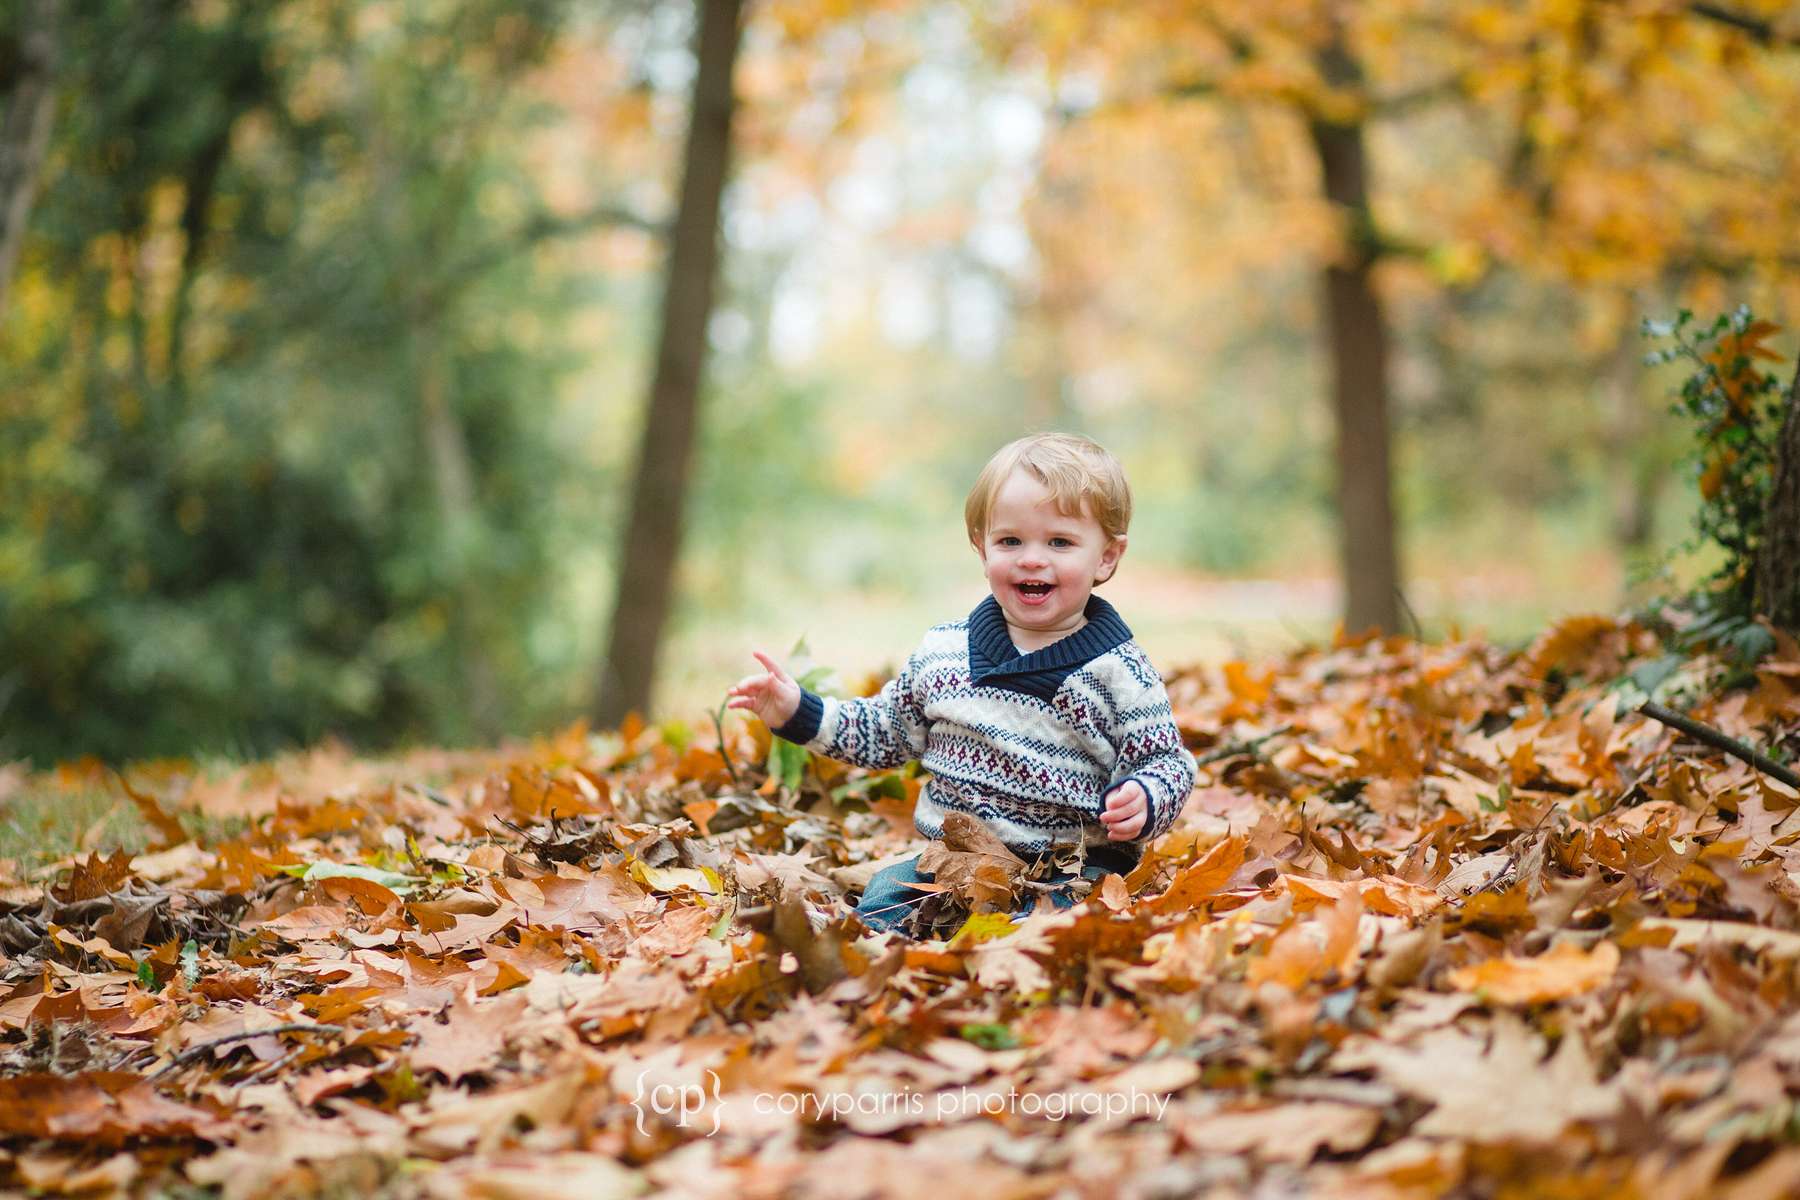 Little boy in fall leaves child portrait photography